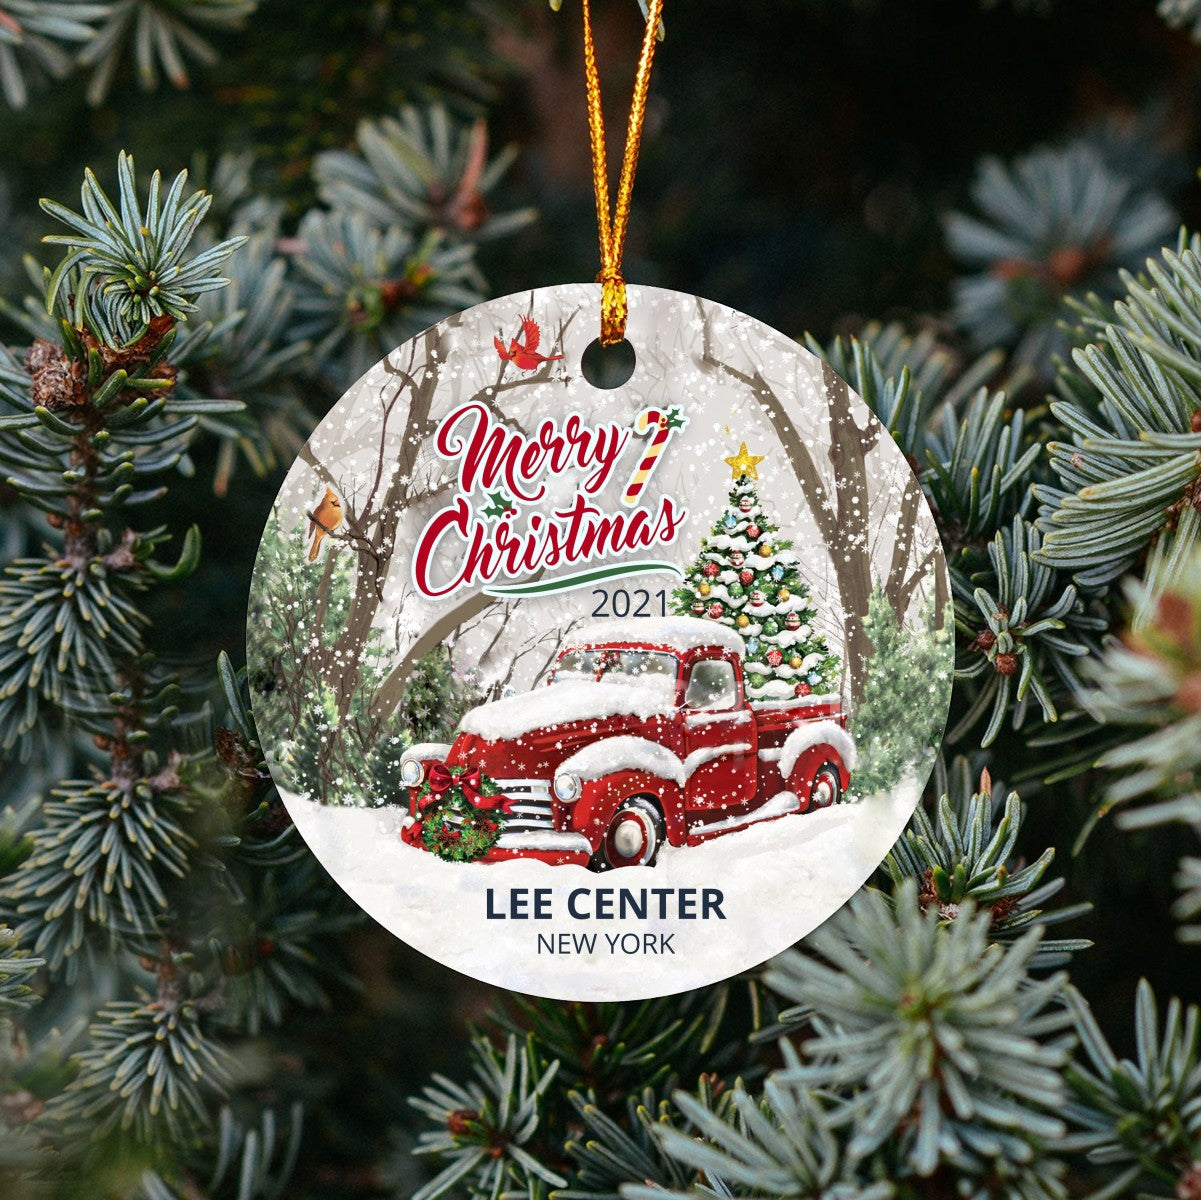 Christmas Tree Ornaments Lee Center - Ornament With Name City, State Lee Center New York NY Ornament - Red Truck Xmas Ornaments 3'' Plastic Gift For Family, Friend And Housewarming